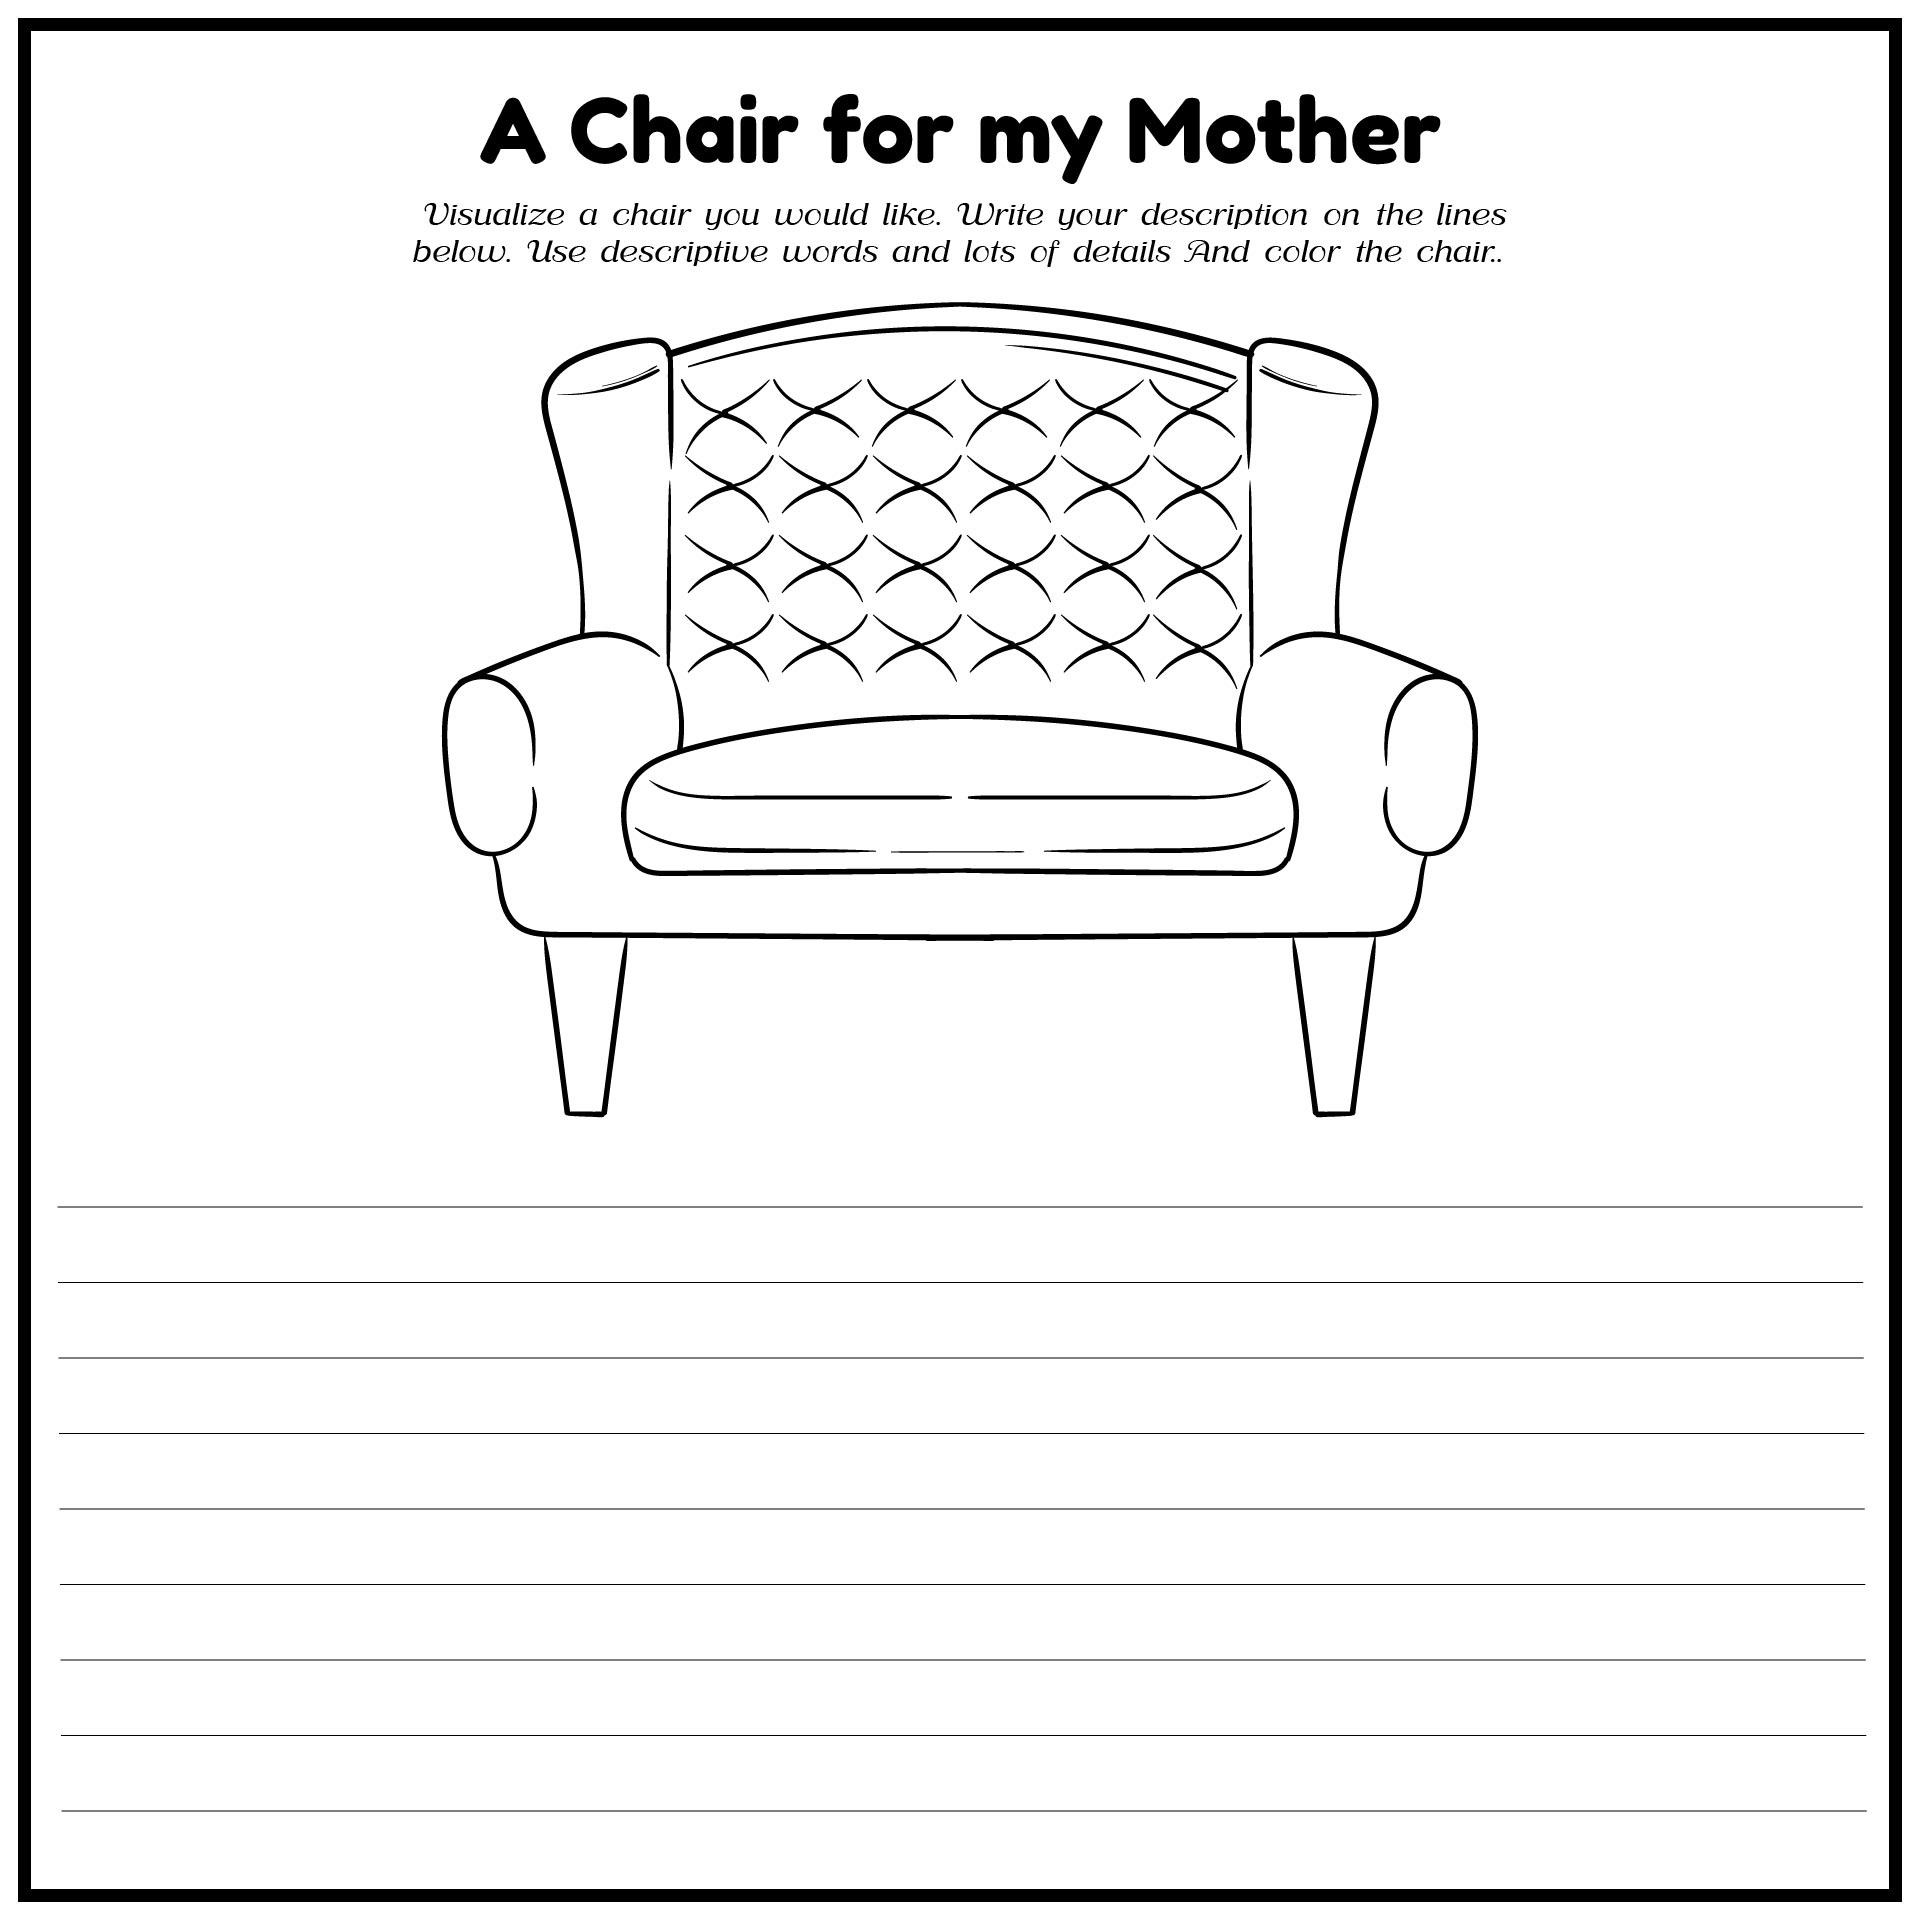 A Chair for My Mother Printable Worksheets